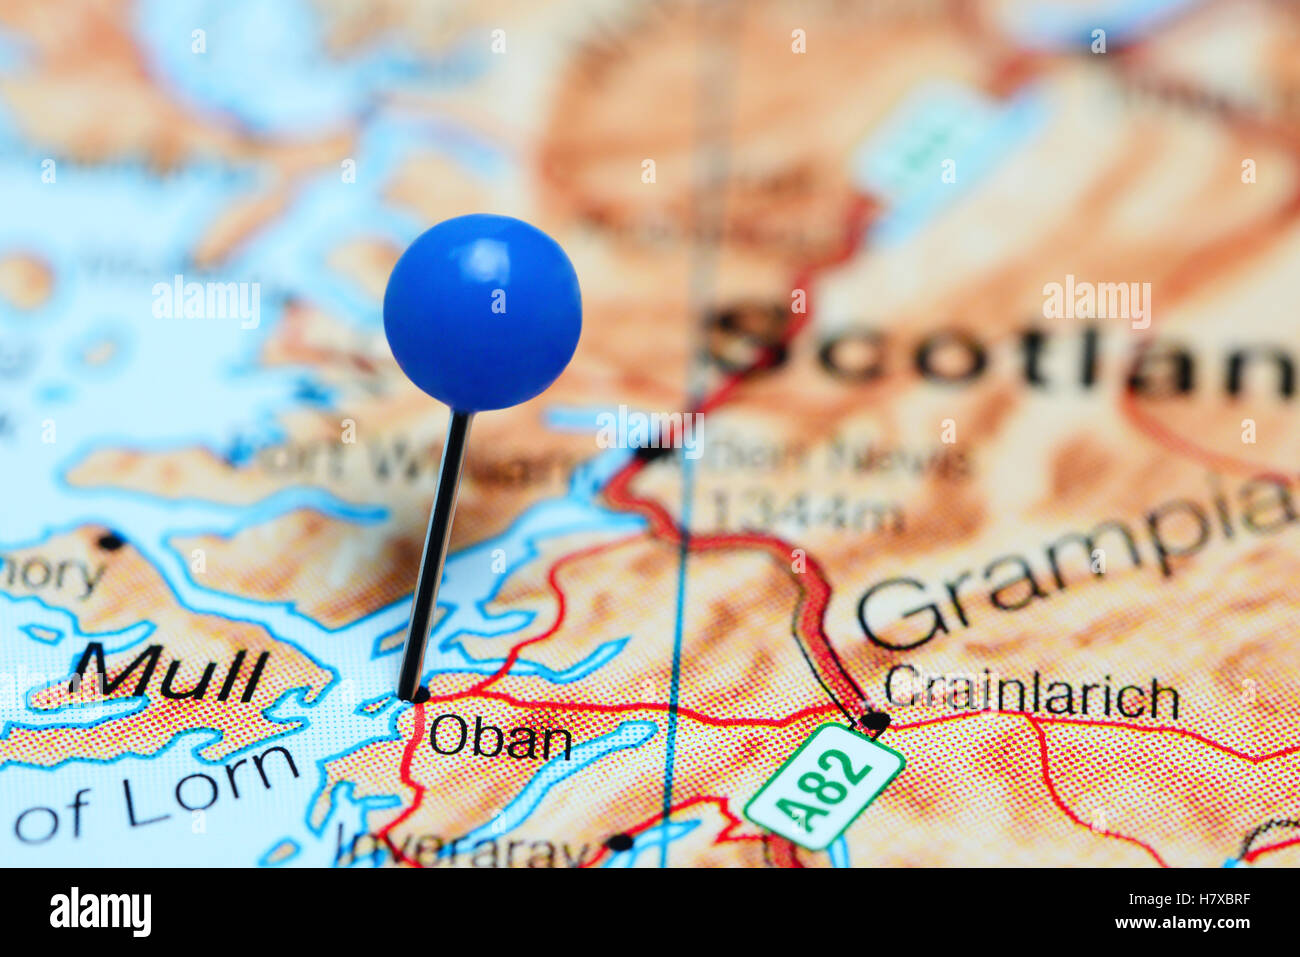 Oban pinned on a map of Scotland Stock Photo